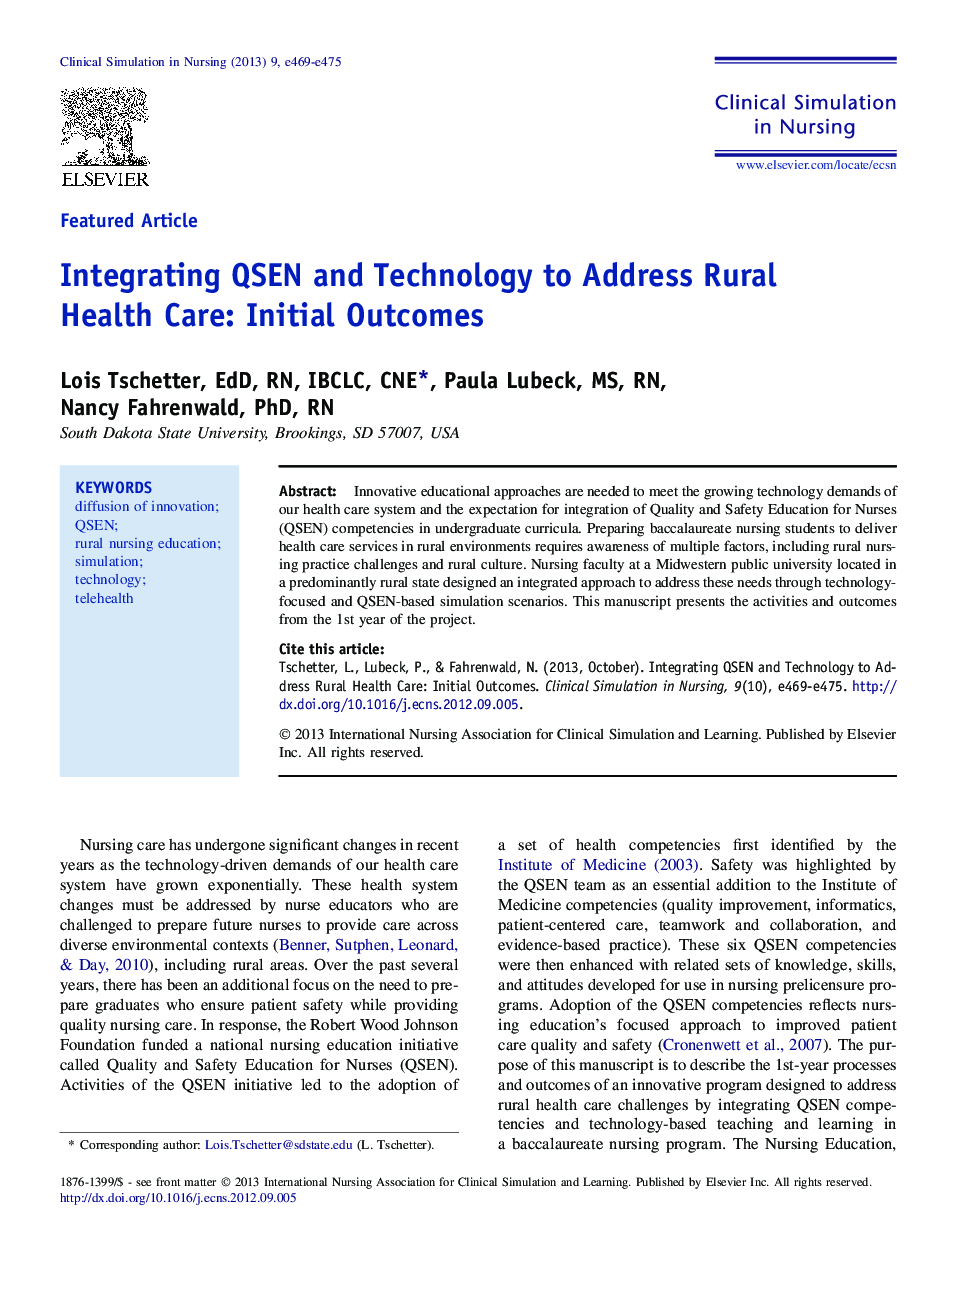 Integrating QSEN and Technology to Address Rural Health Care: Initial Outcomes